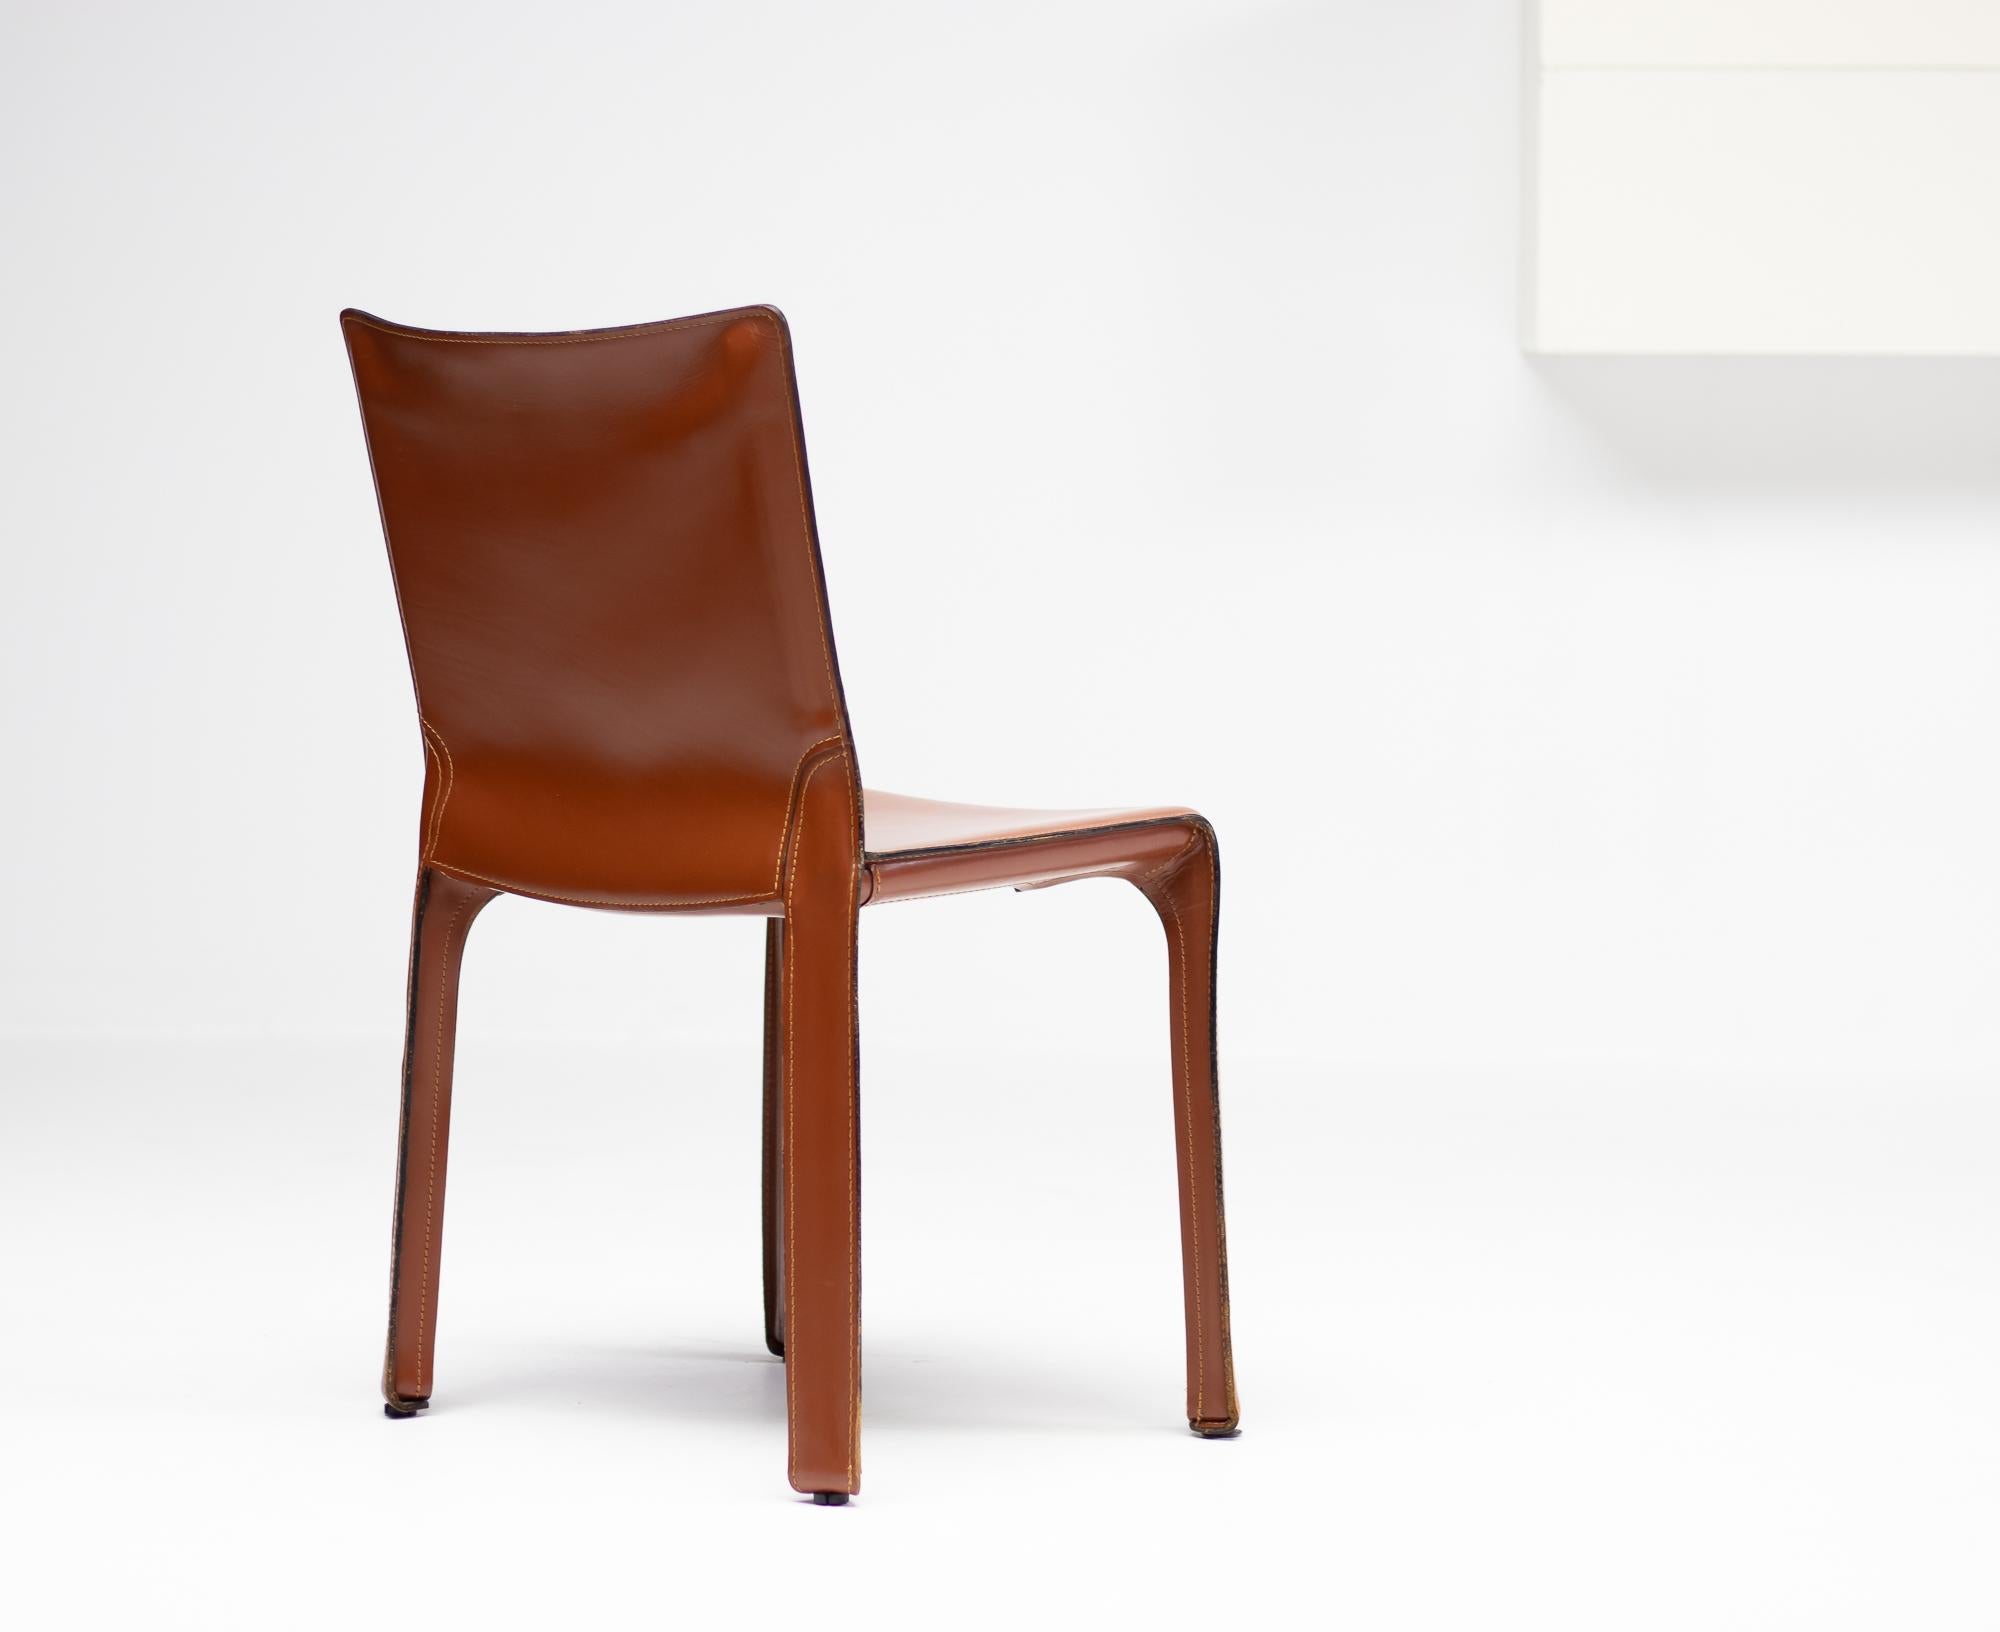 Set of 6 side chairs model Cab, designed by Mario Bellini for Cassina.
Wonderful 1990s cognac saddle leather chairs in excellent vintage condition.
Marked.